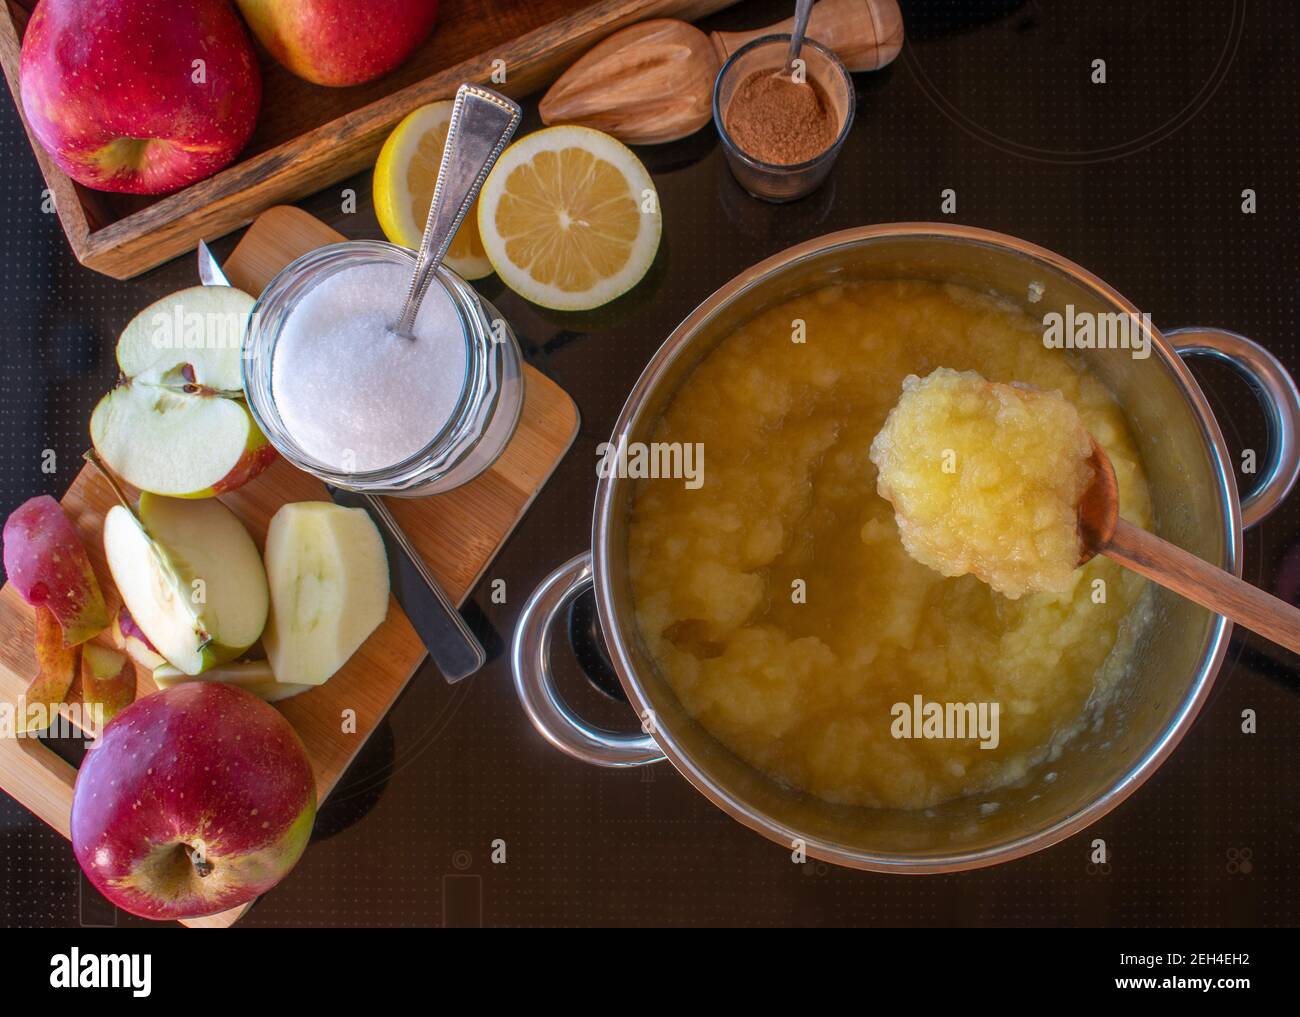 Preparation of apple sauce - Cooking apple compote at home on a stove Stock Photo